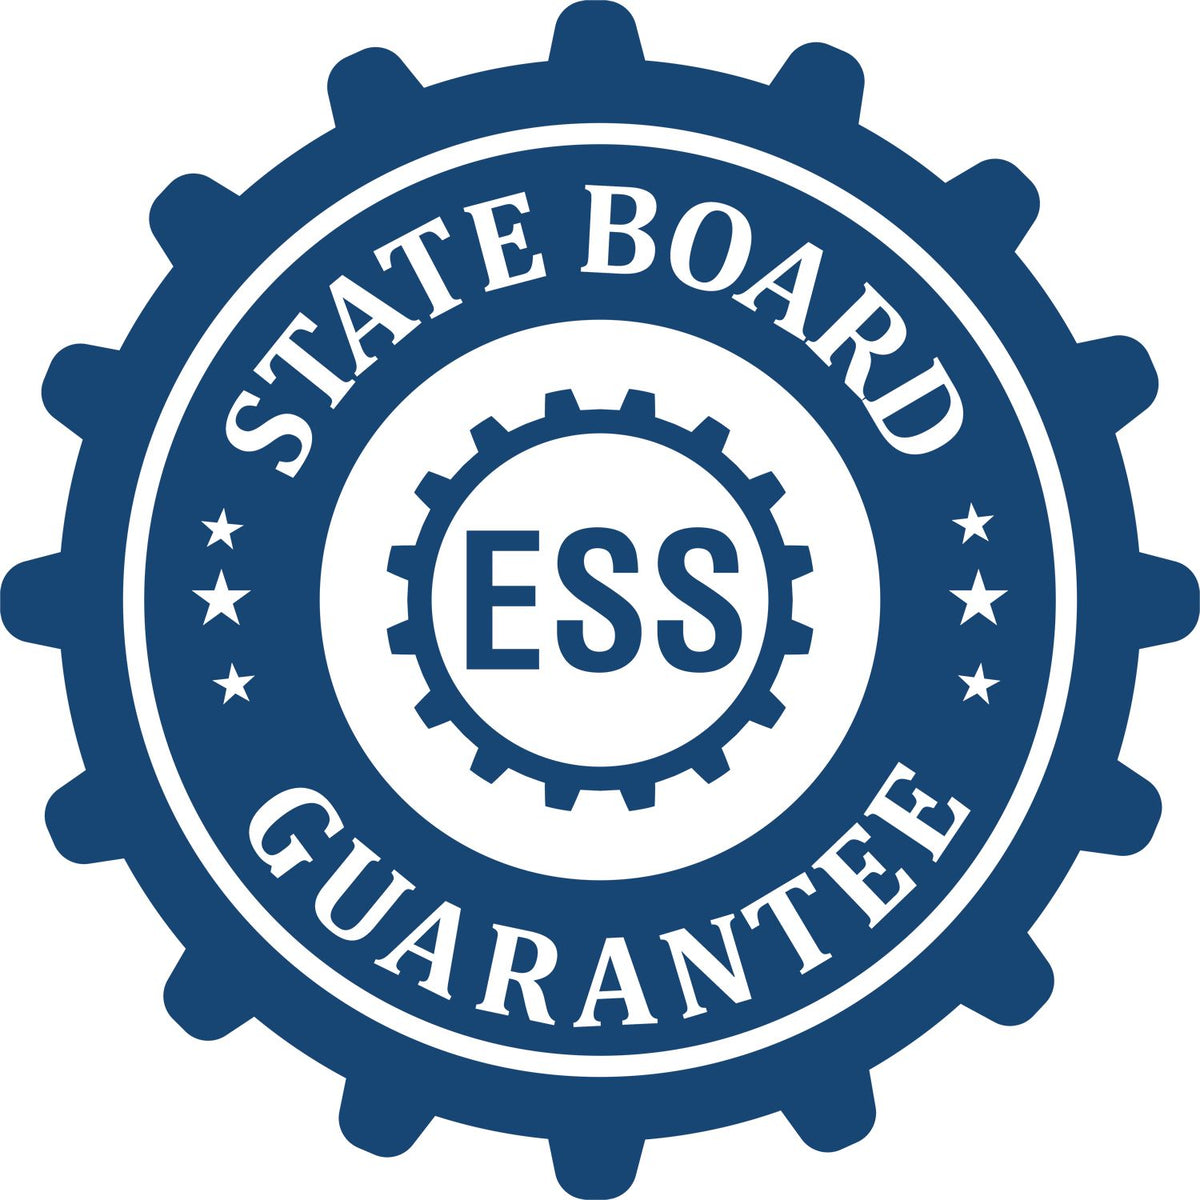 An emblem in a gear shape illustrating a state board guarantee for the State of Delaware Extended Long Reach Engineer Seal product.